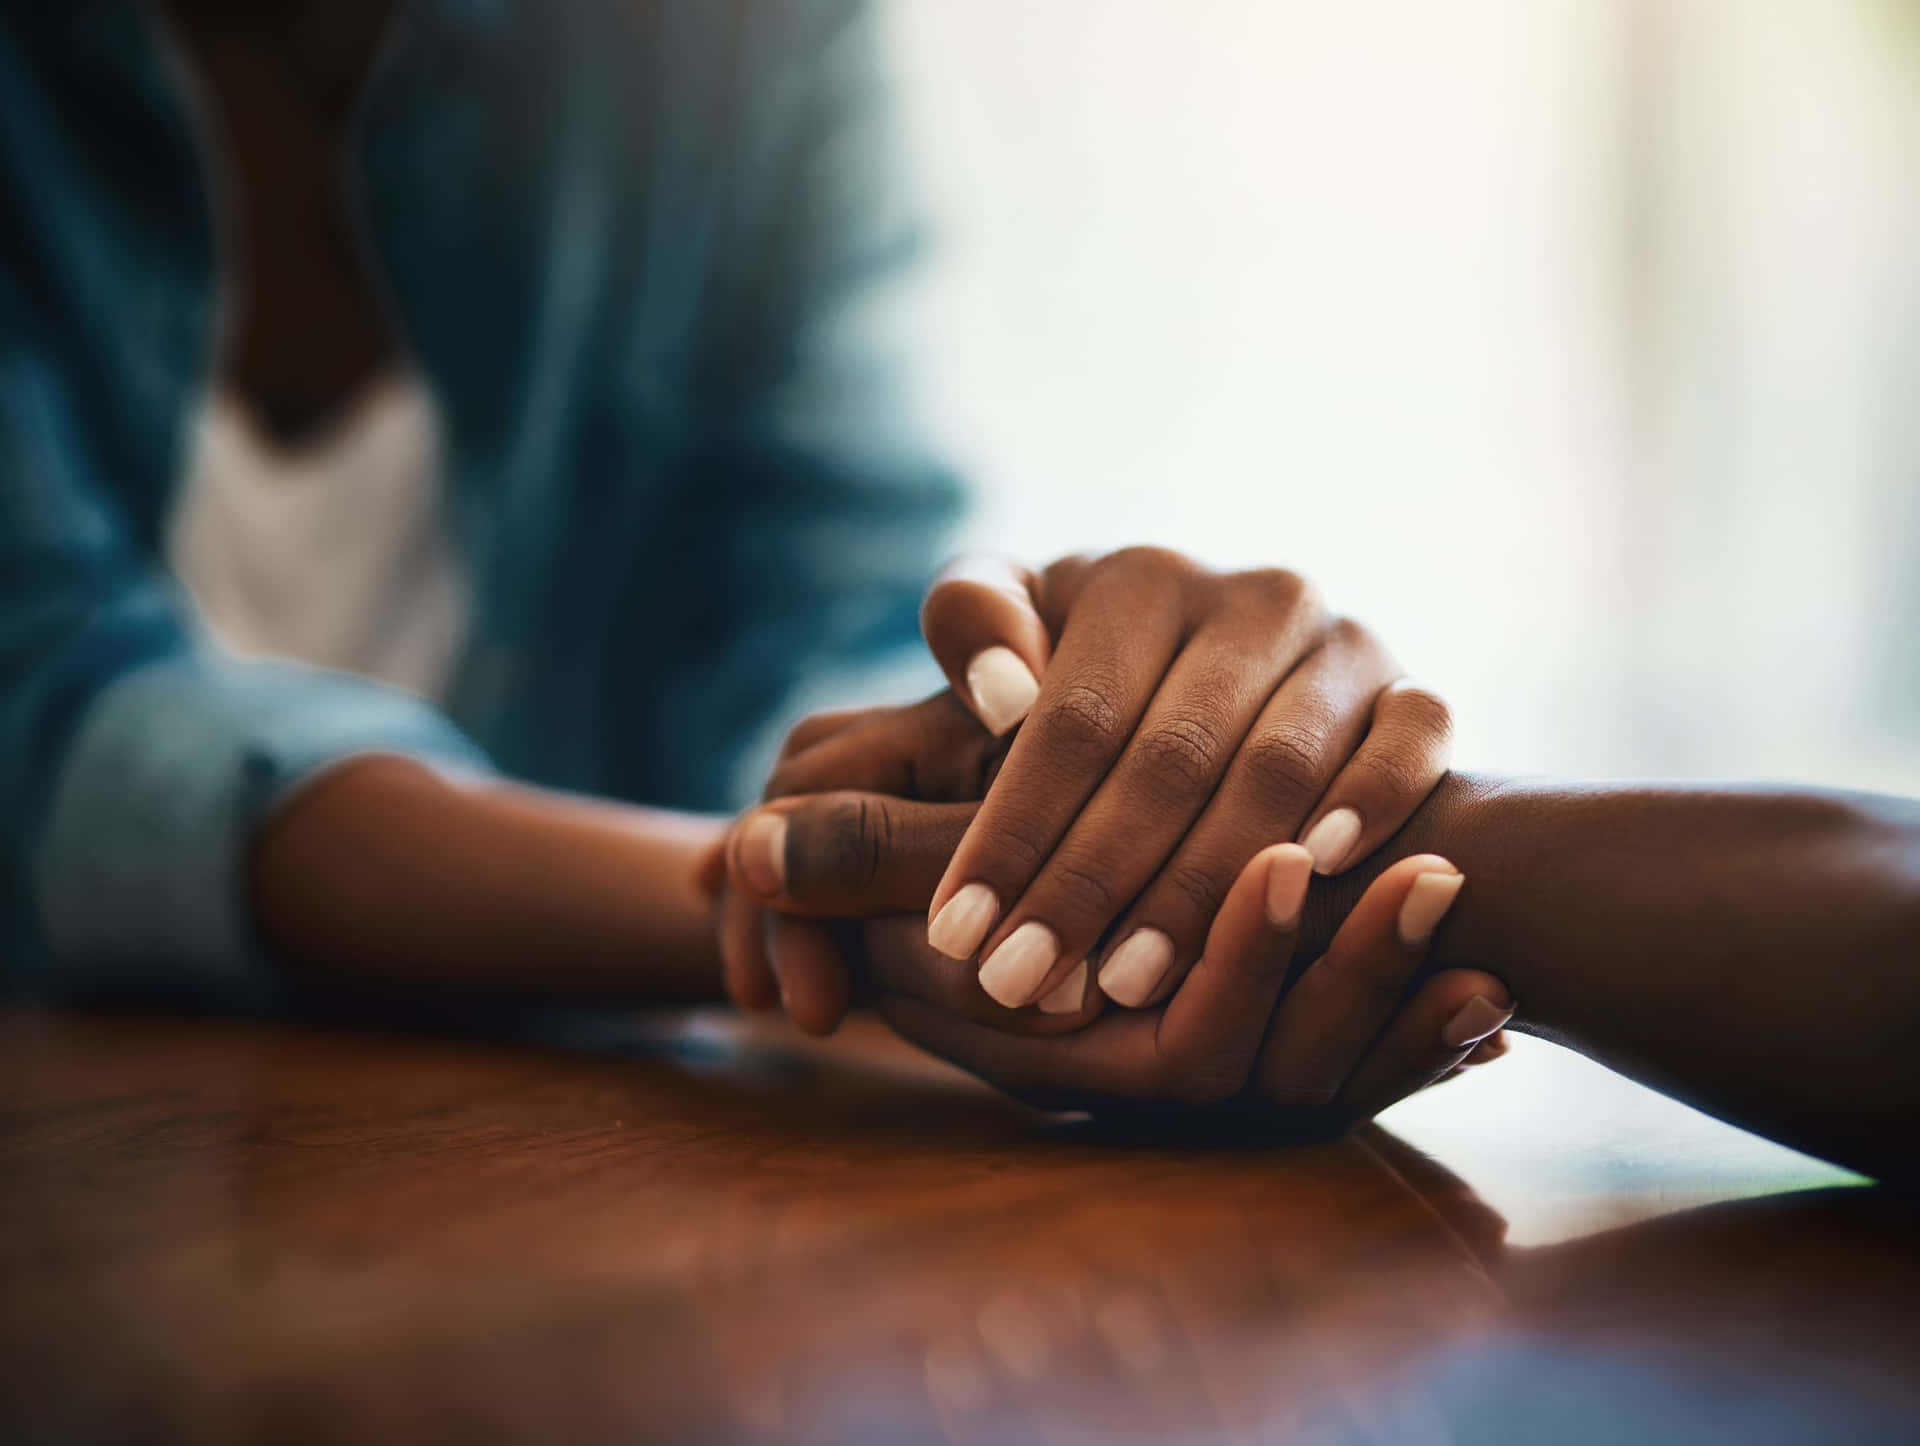 Two People Holding Hands On A Table